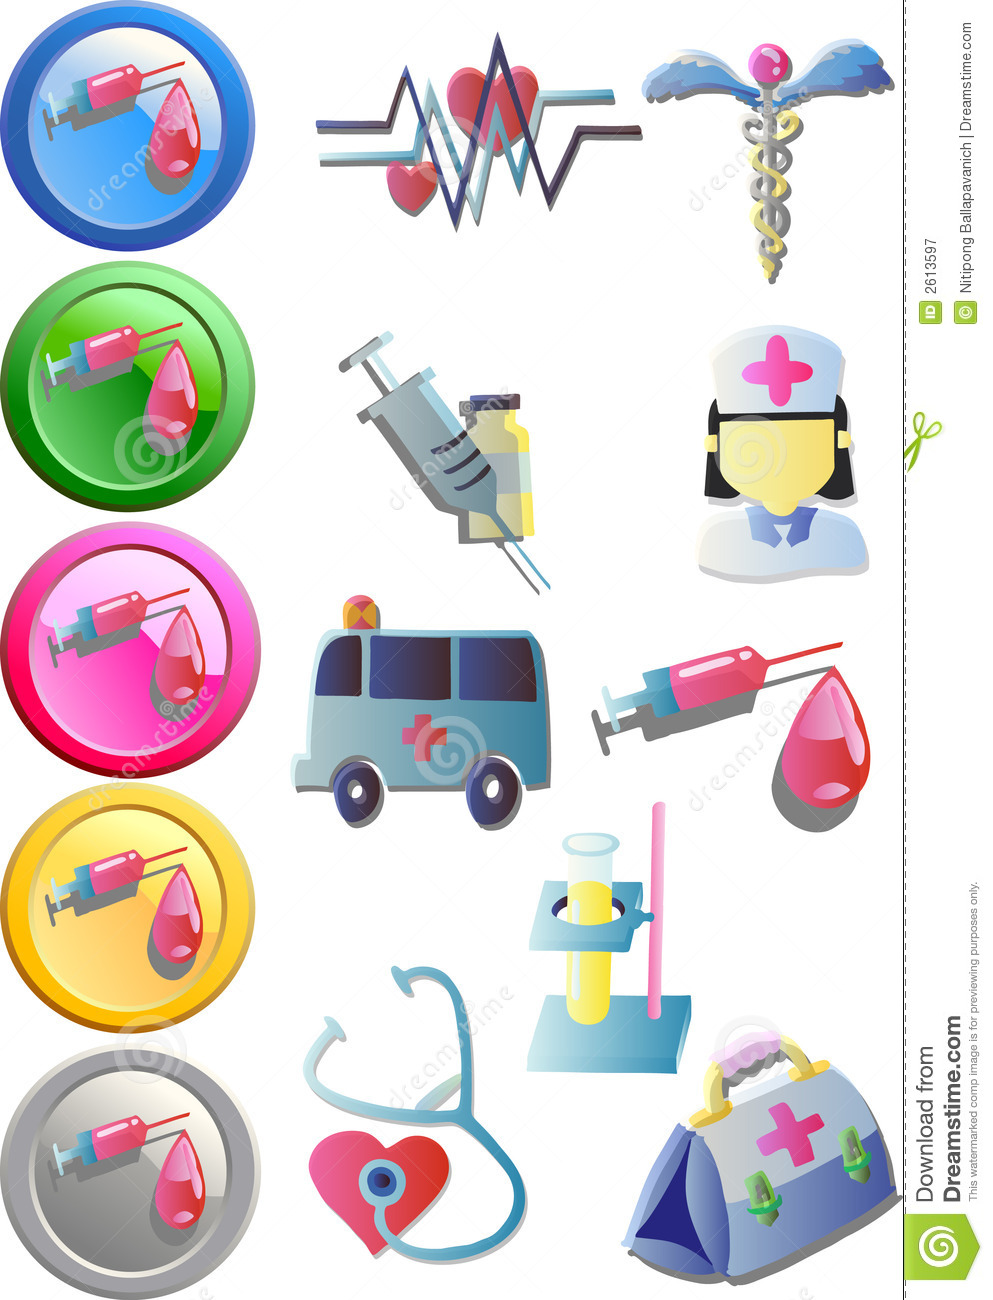 Free clipart medical images - - Medical Clip Art Free Downloads